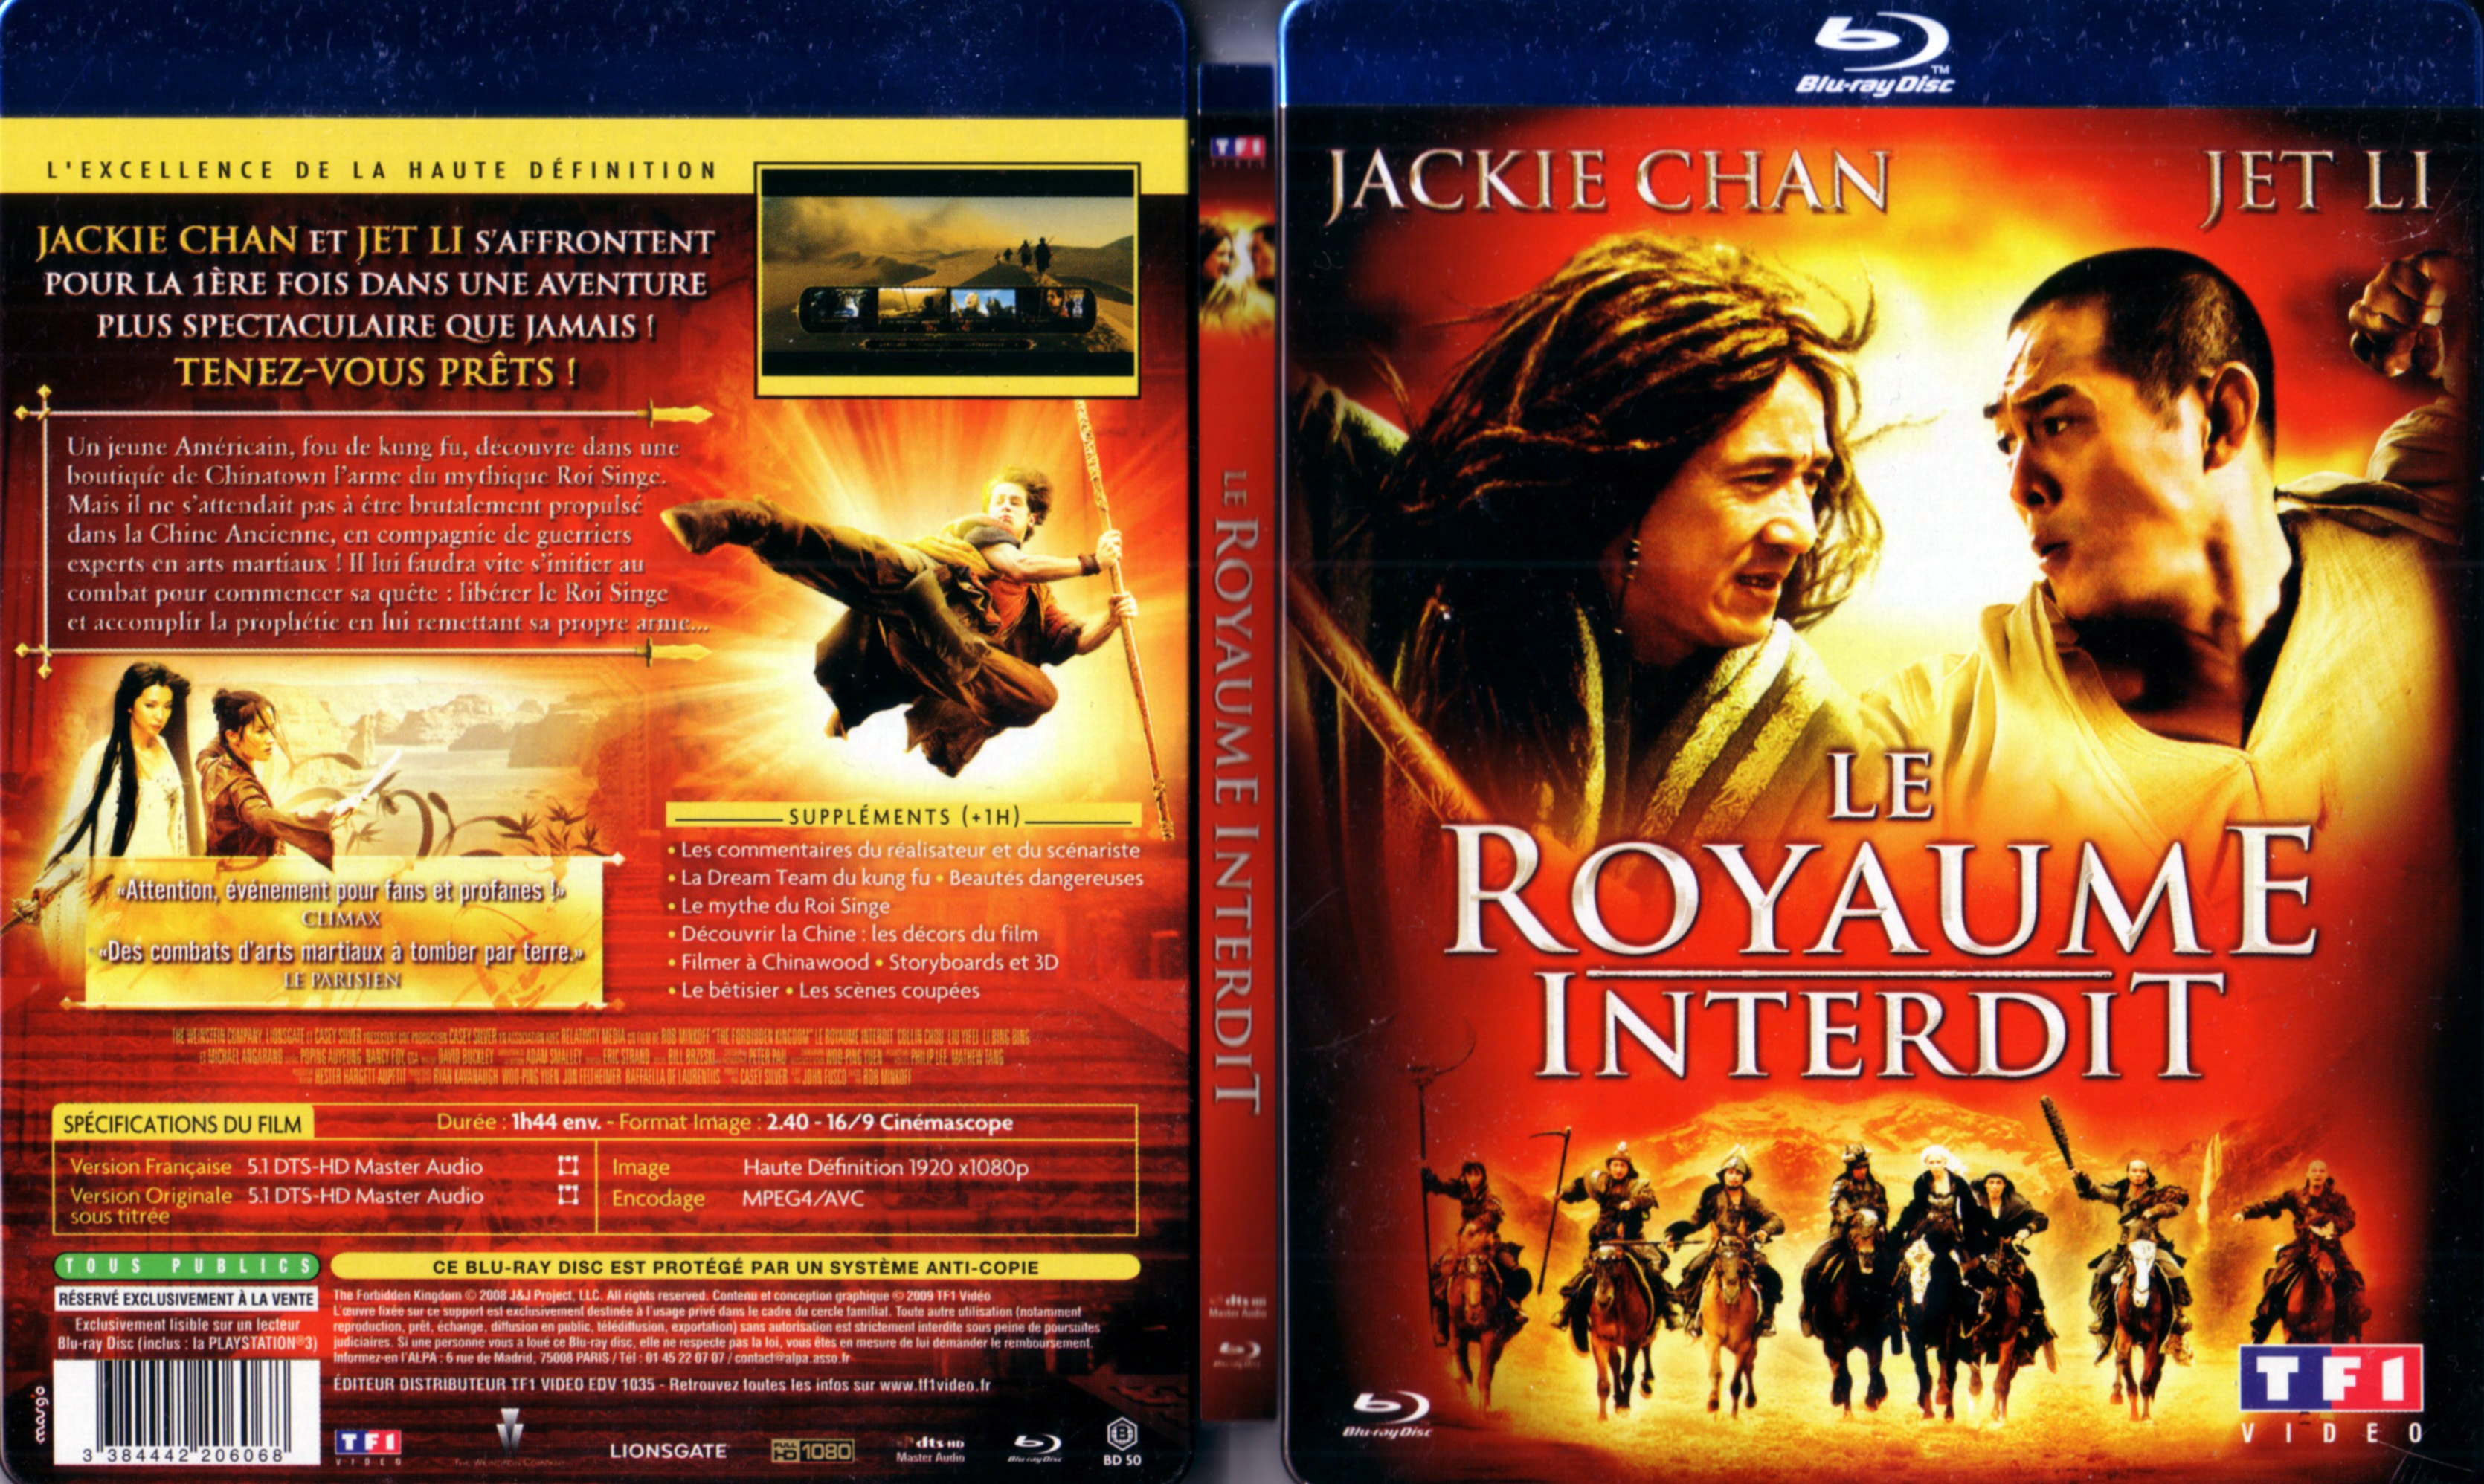 Jaquette DVD Le royaume interdit (BLU-RAY)